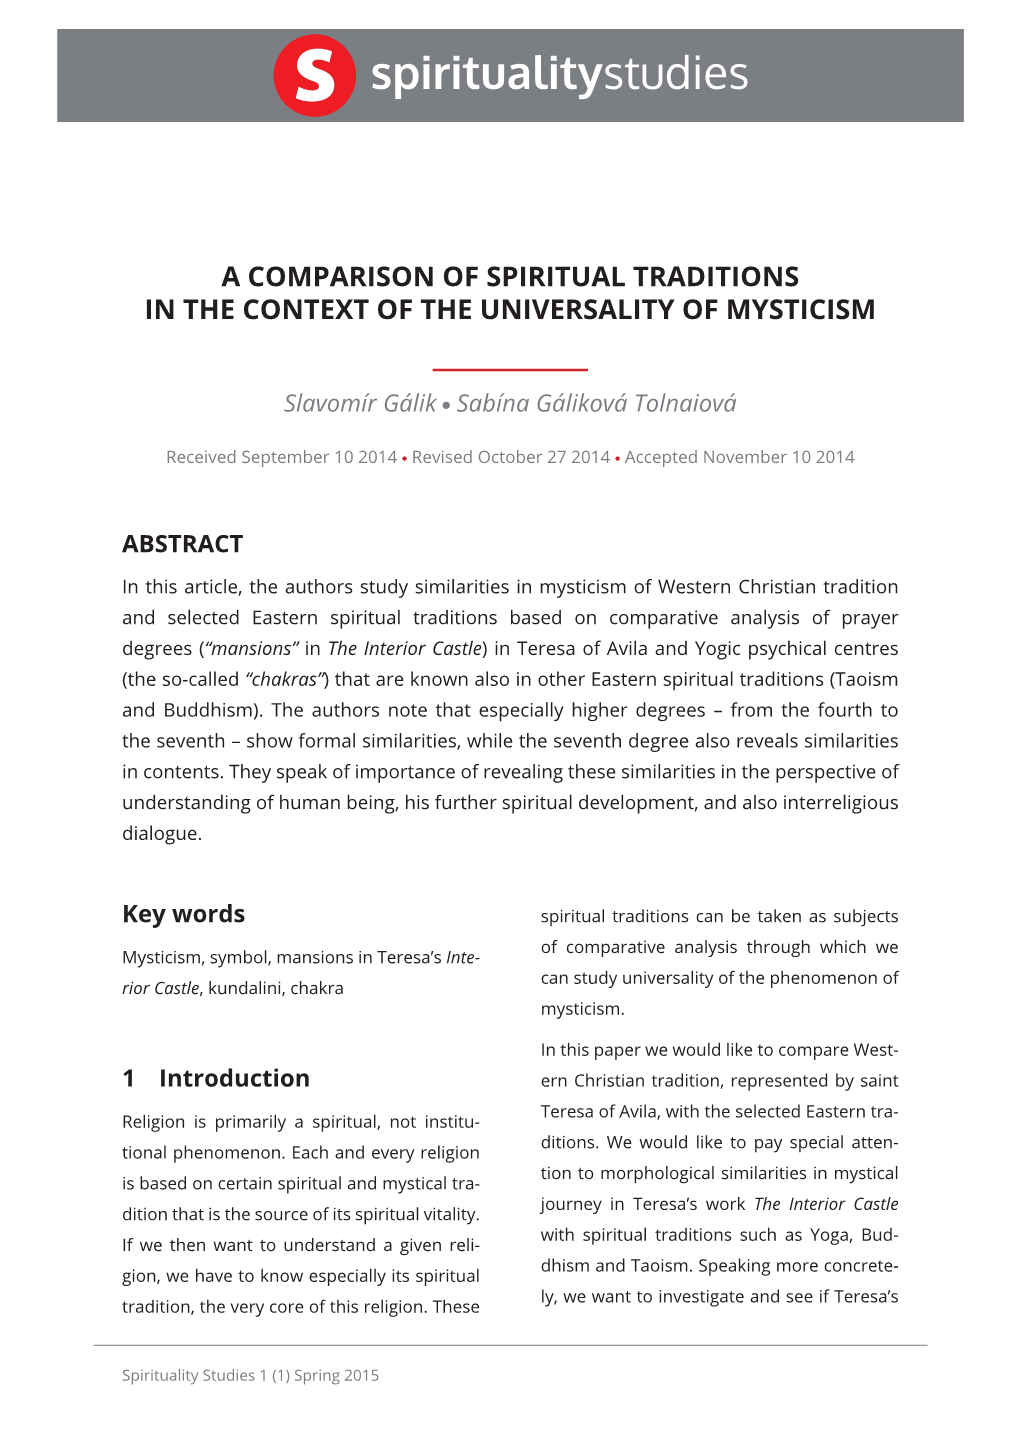 A Comparison of Spiritual Traditions in the Context of the Universality of Mysticism